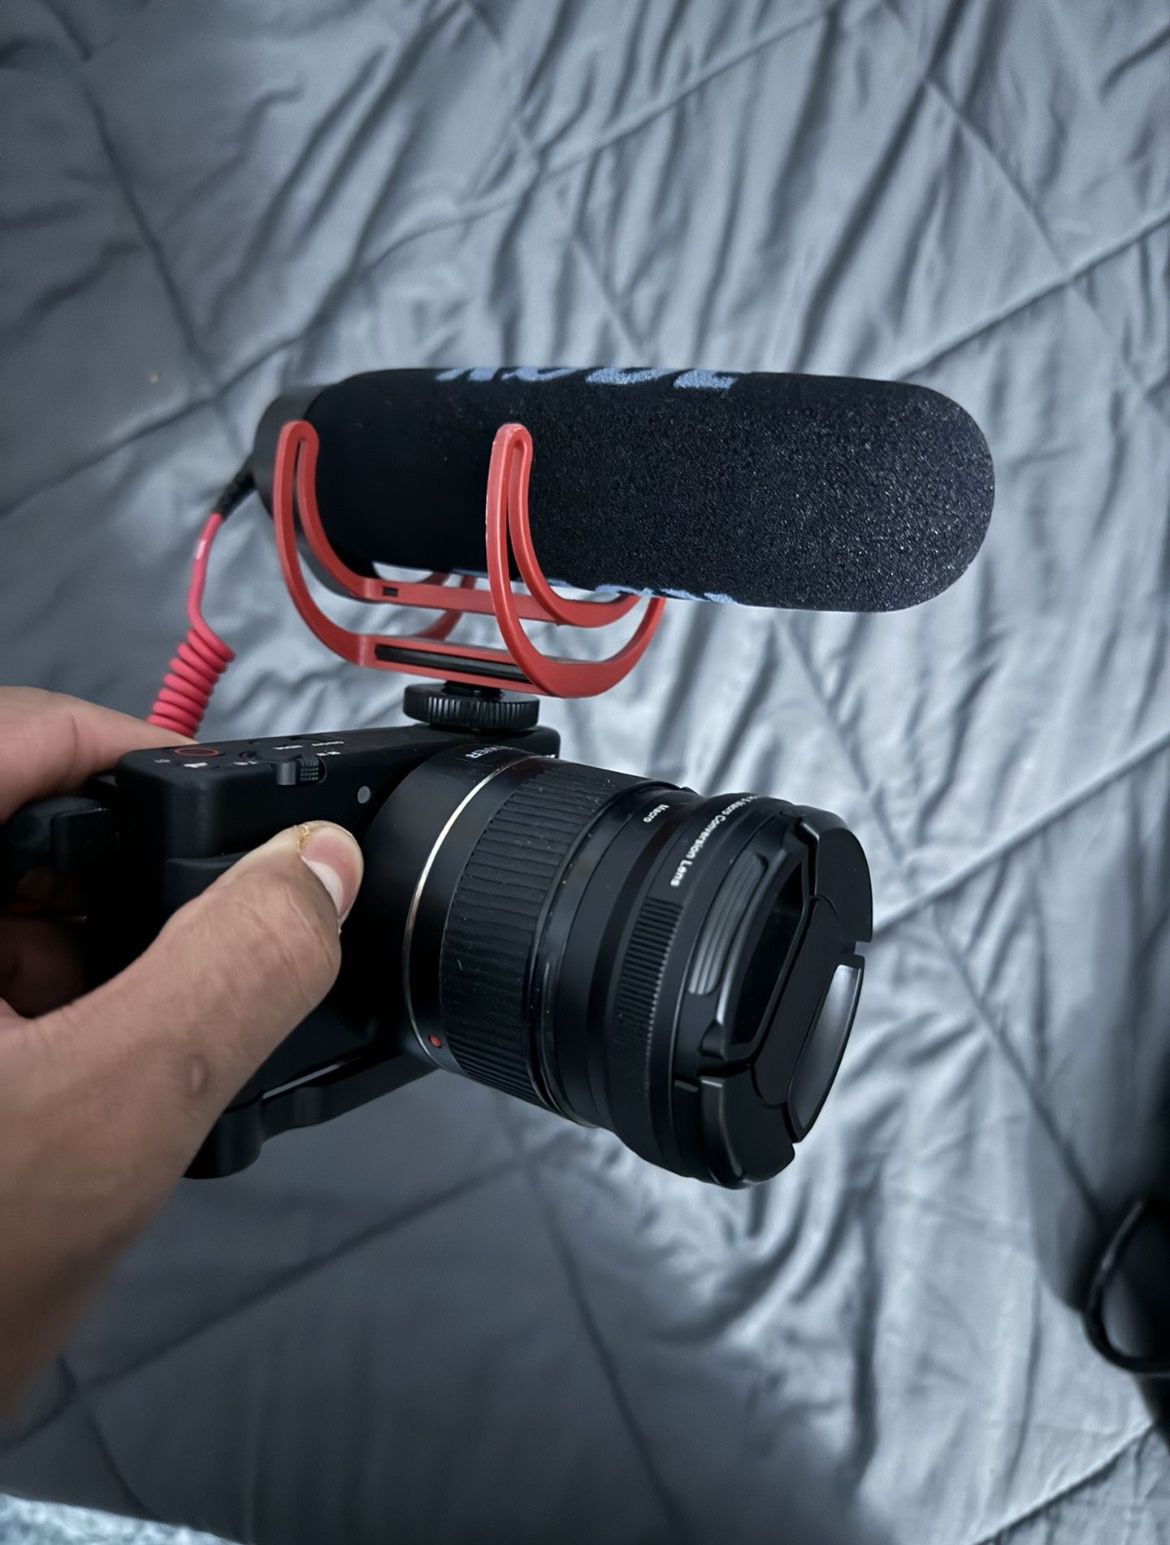 Sony ZV-1X Camera for Content Creators,Vlogging and YouTube with Flip